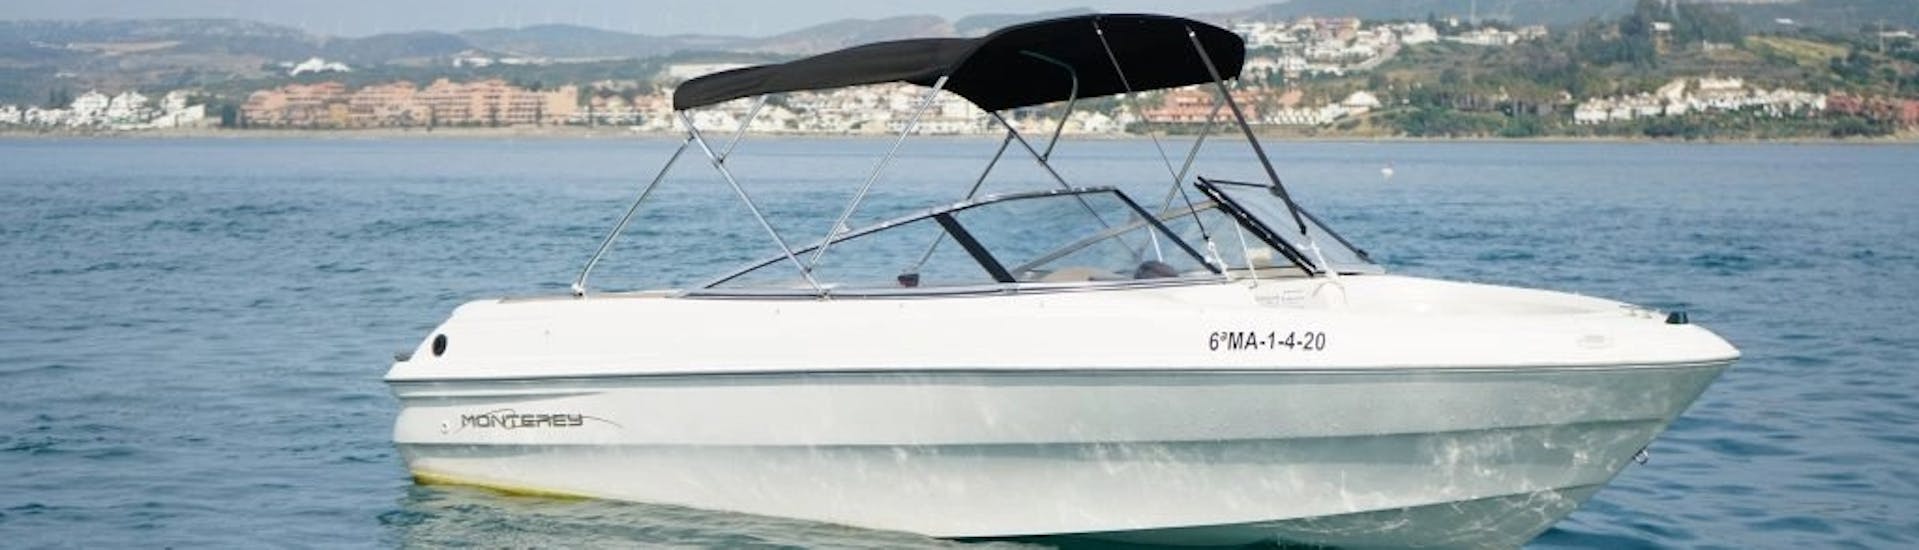 Our boat navigating around Costa del Sol during a Boat Rental in Estepona (up to 6 people) with Licence with OfBlue Rental Boats.